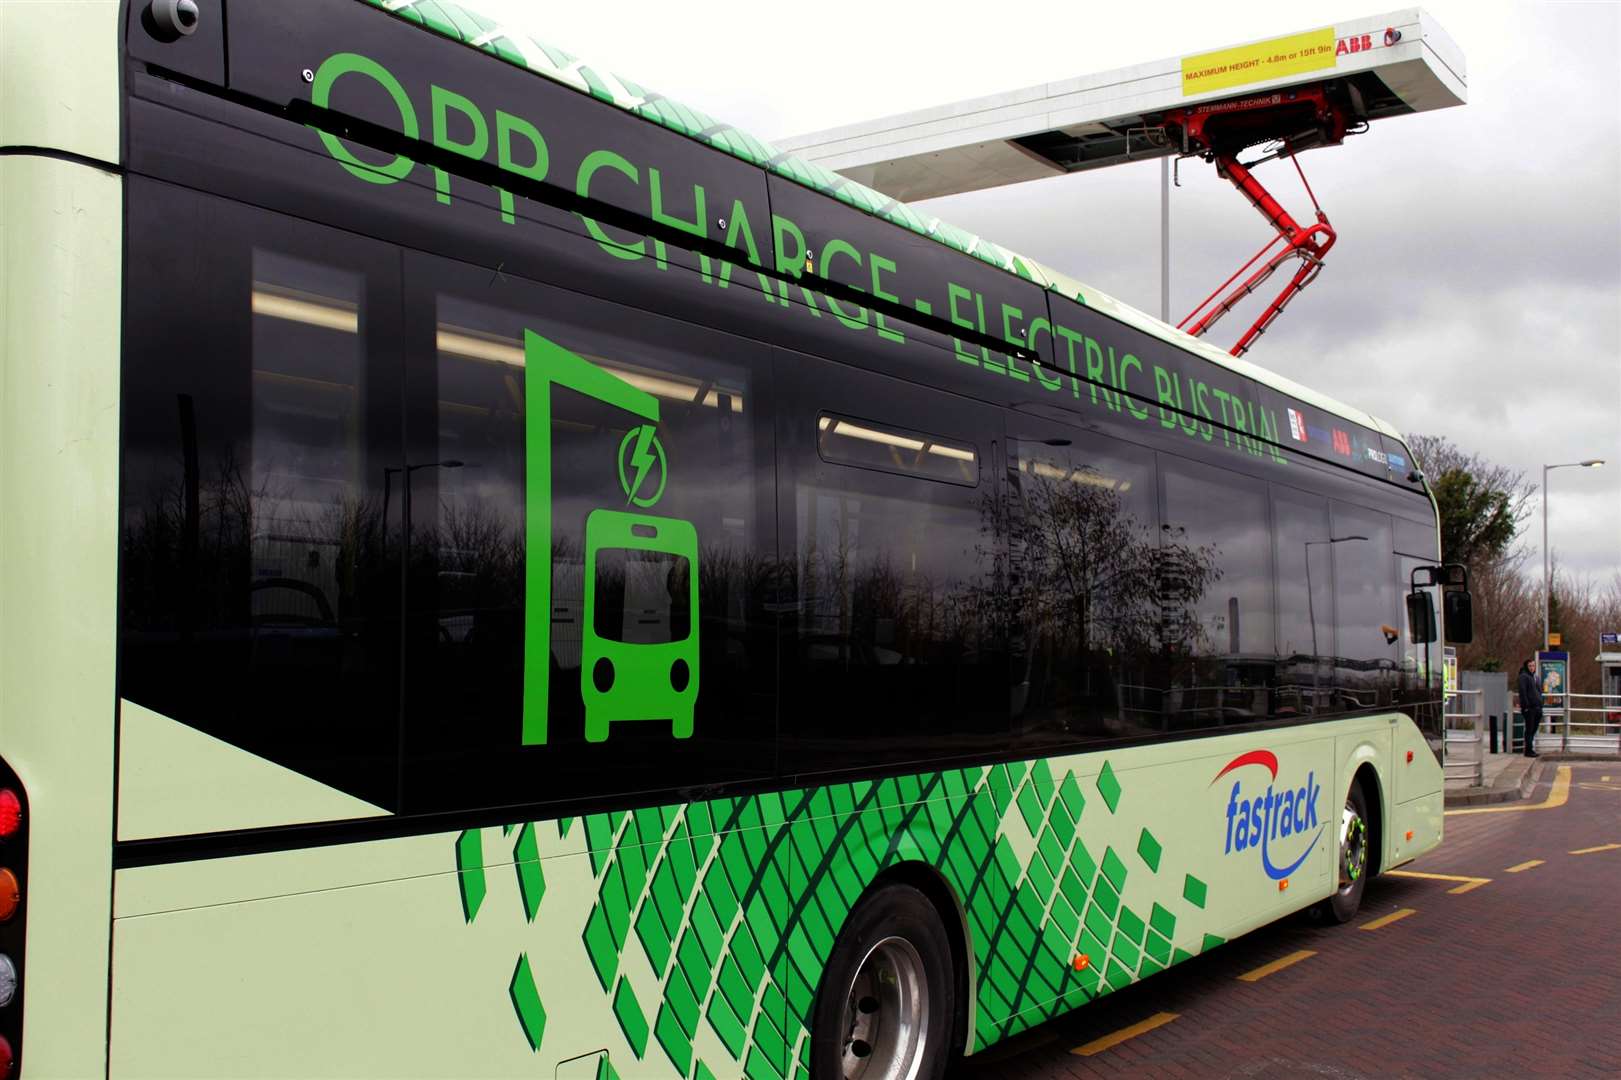 The new electric bus being trialled by Kent County Council (1232159)